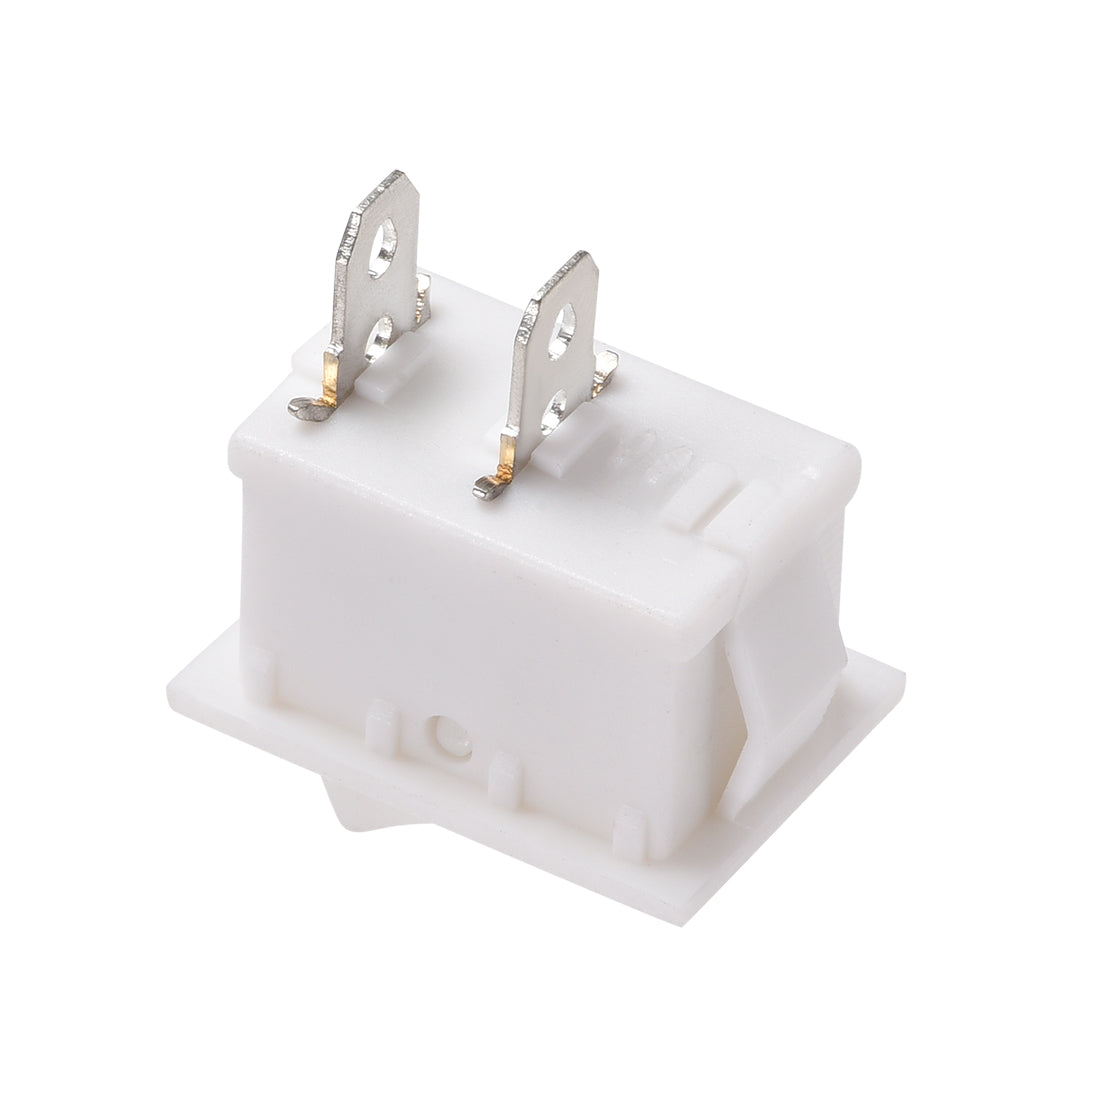 uxcell Uxcell Mini Boat Rocker Switch White Toggle Switch ON/OFF AC 250V/6A 125V/10A 1pcs